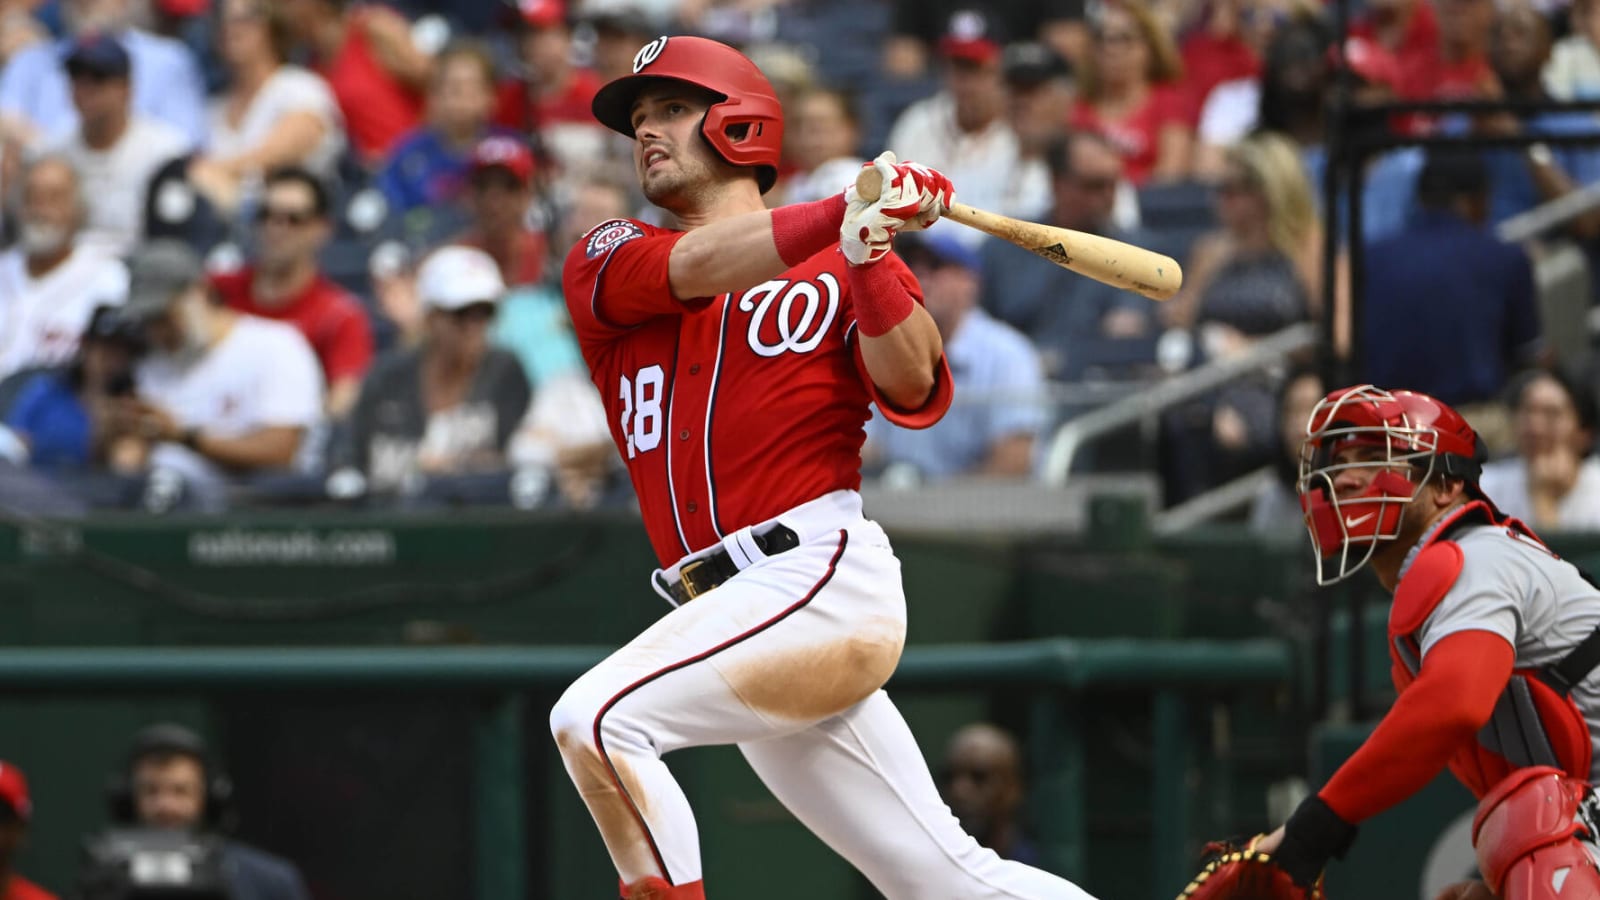 Yankees trade ideas: Acquiring contact hitter from Nationals